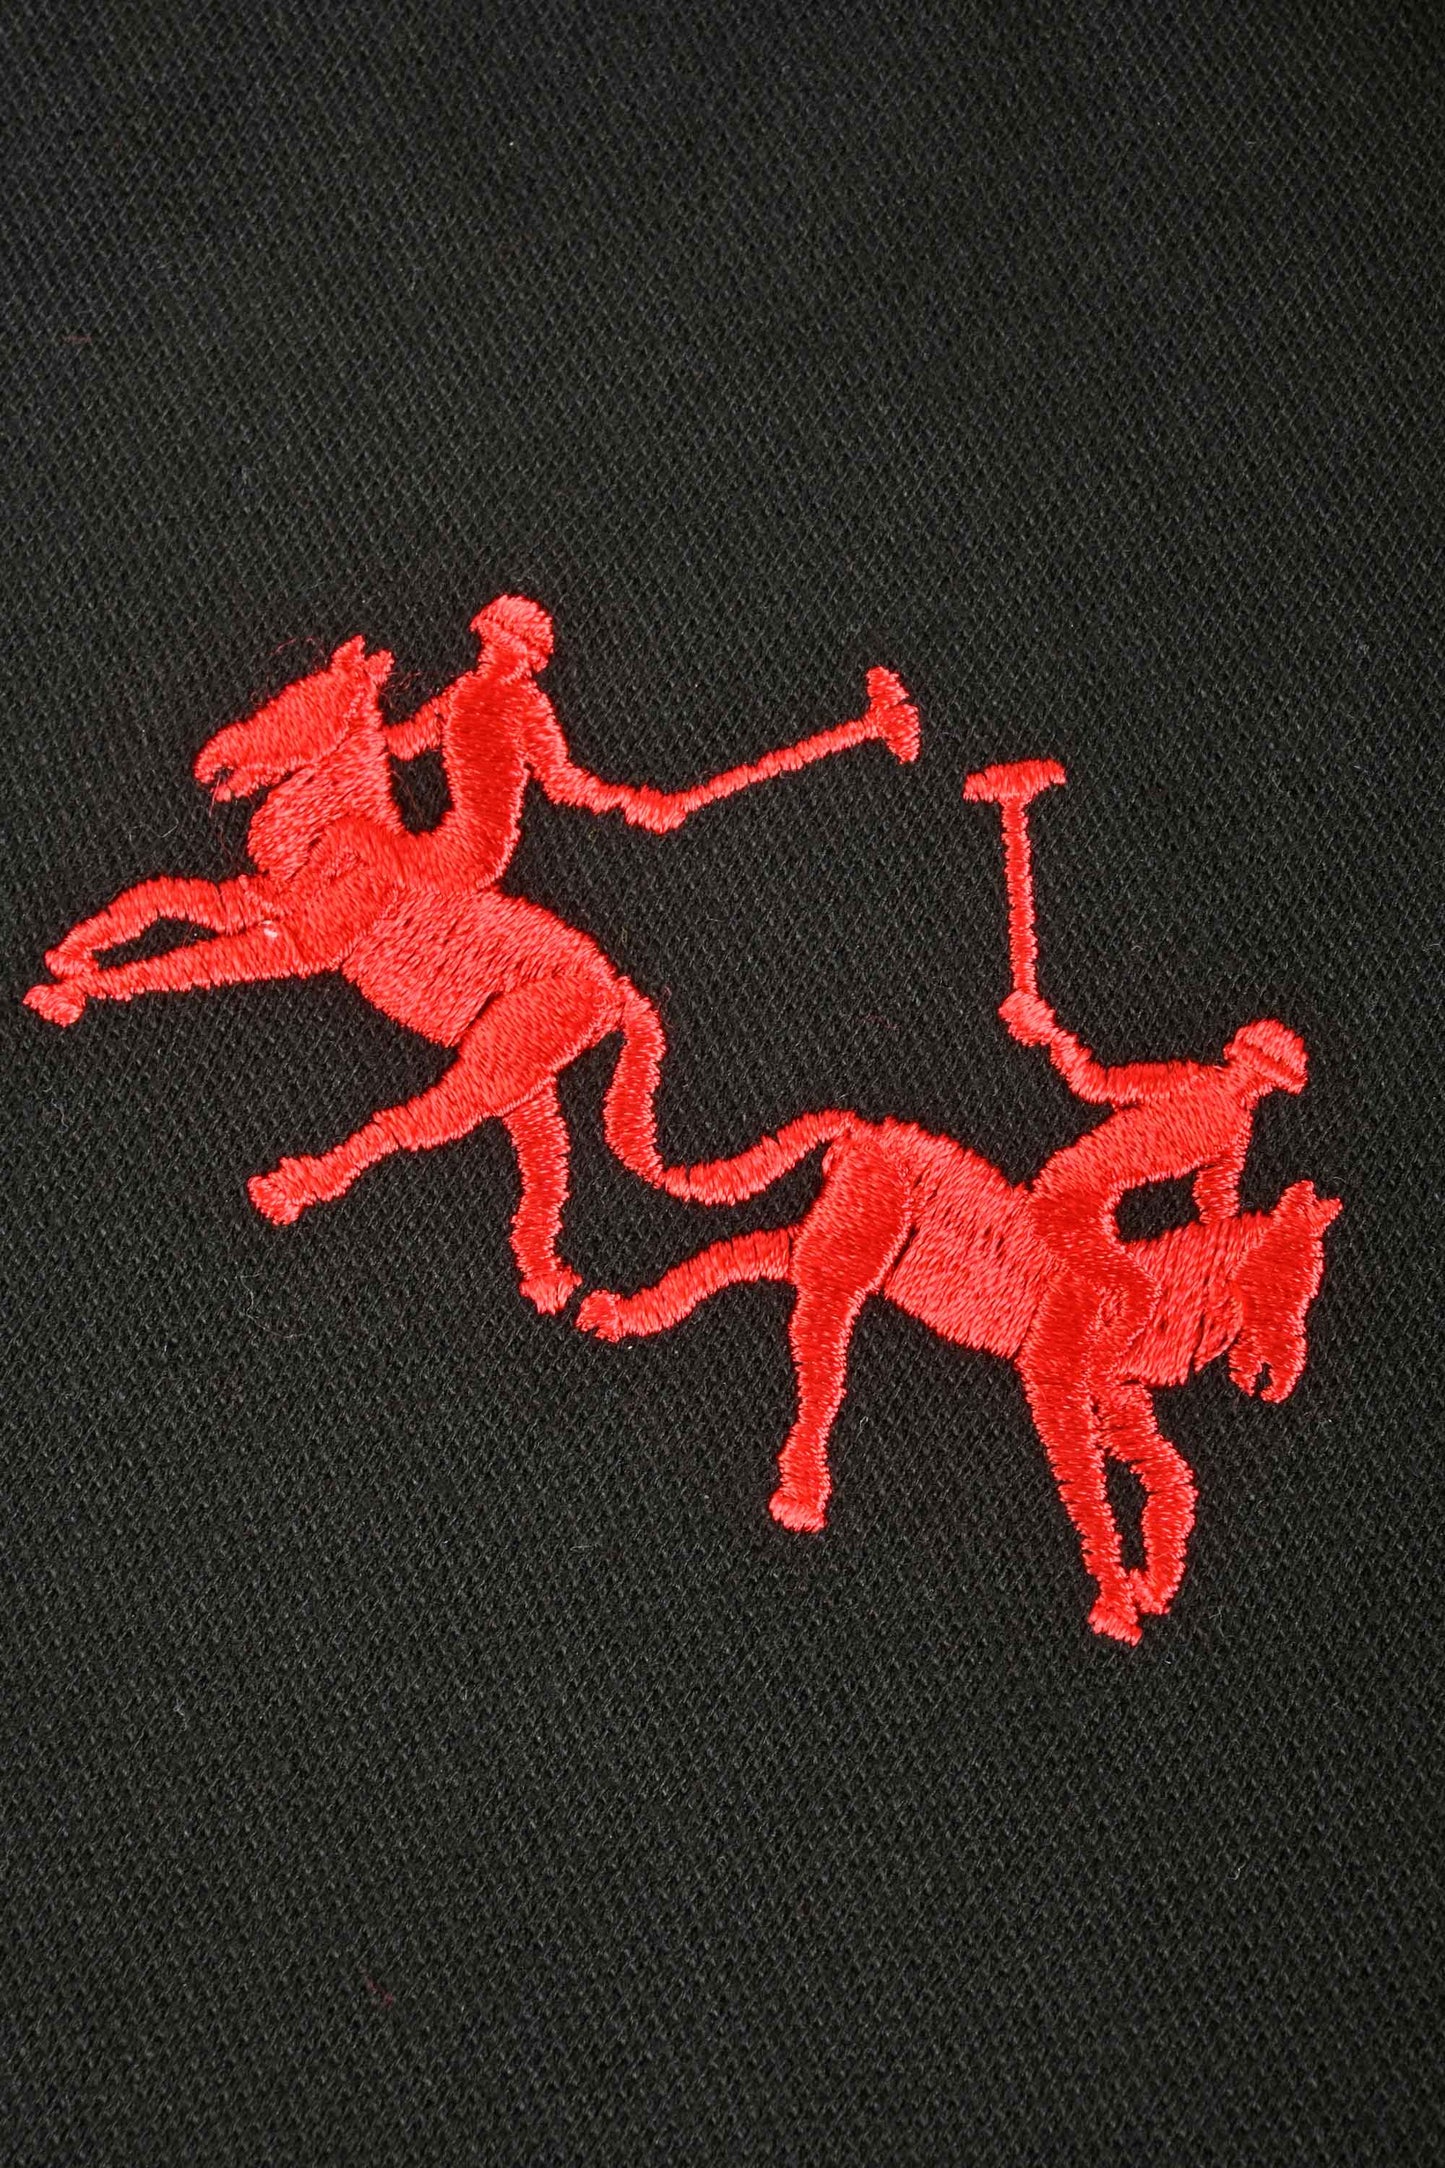 Polo Republica Men's Two Pony Crest & 1 Embroidered Polo Shirt